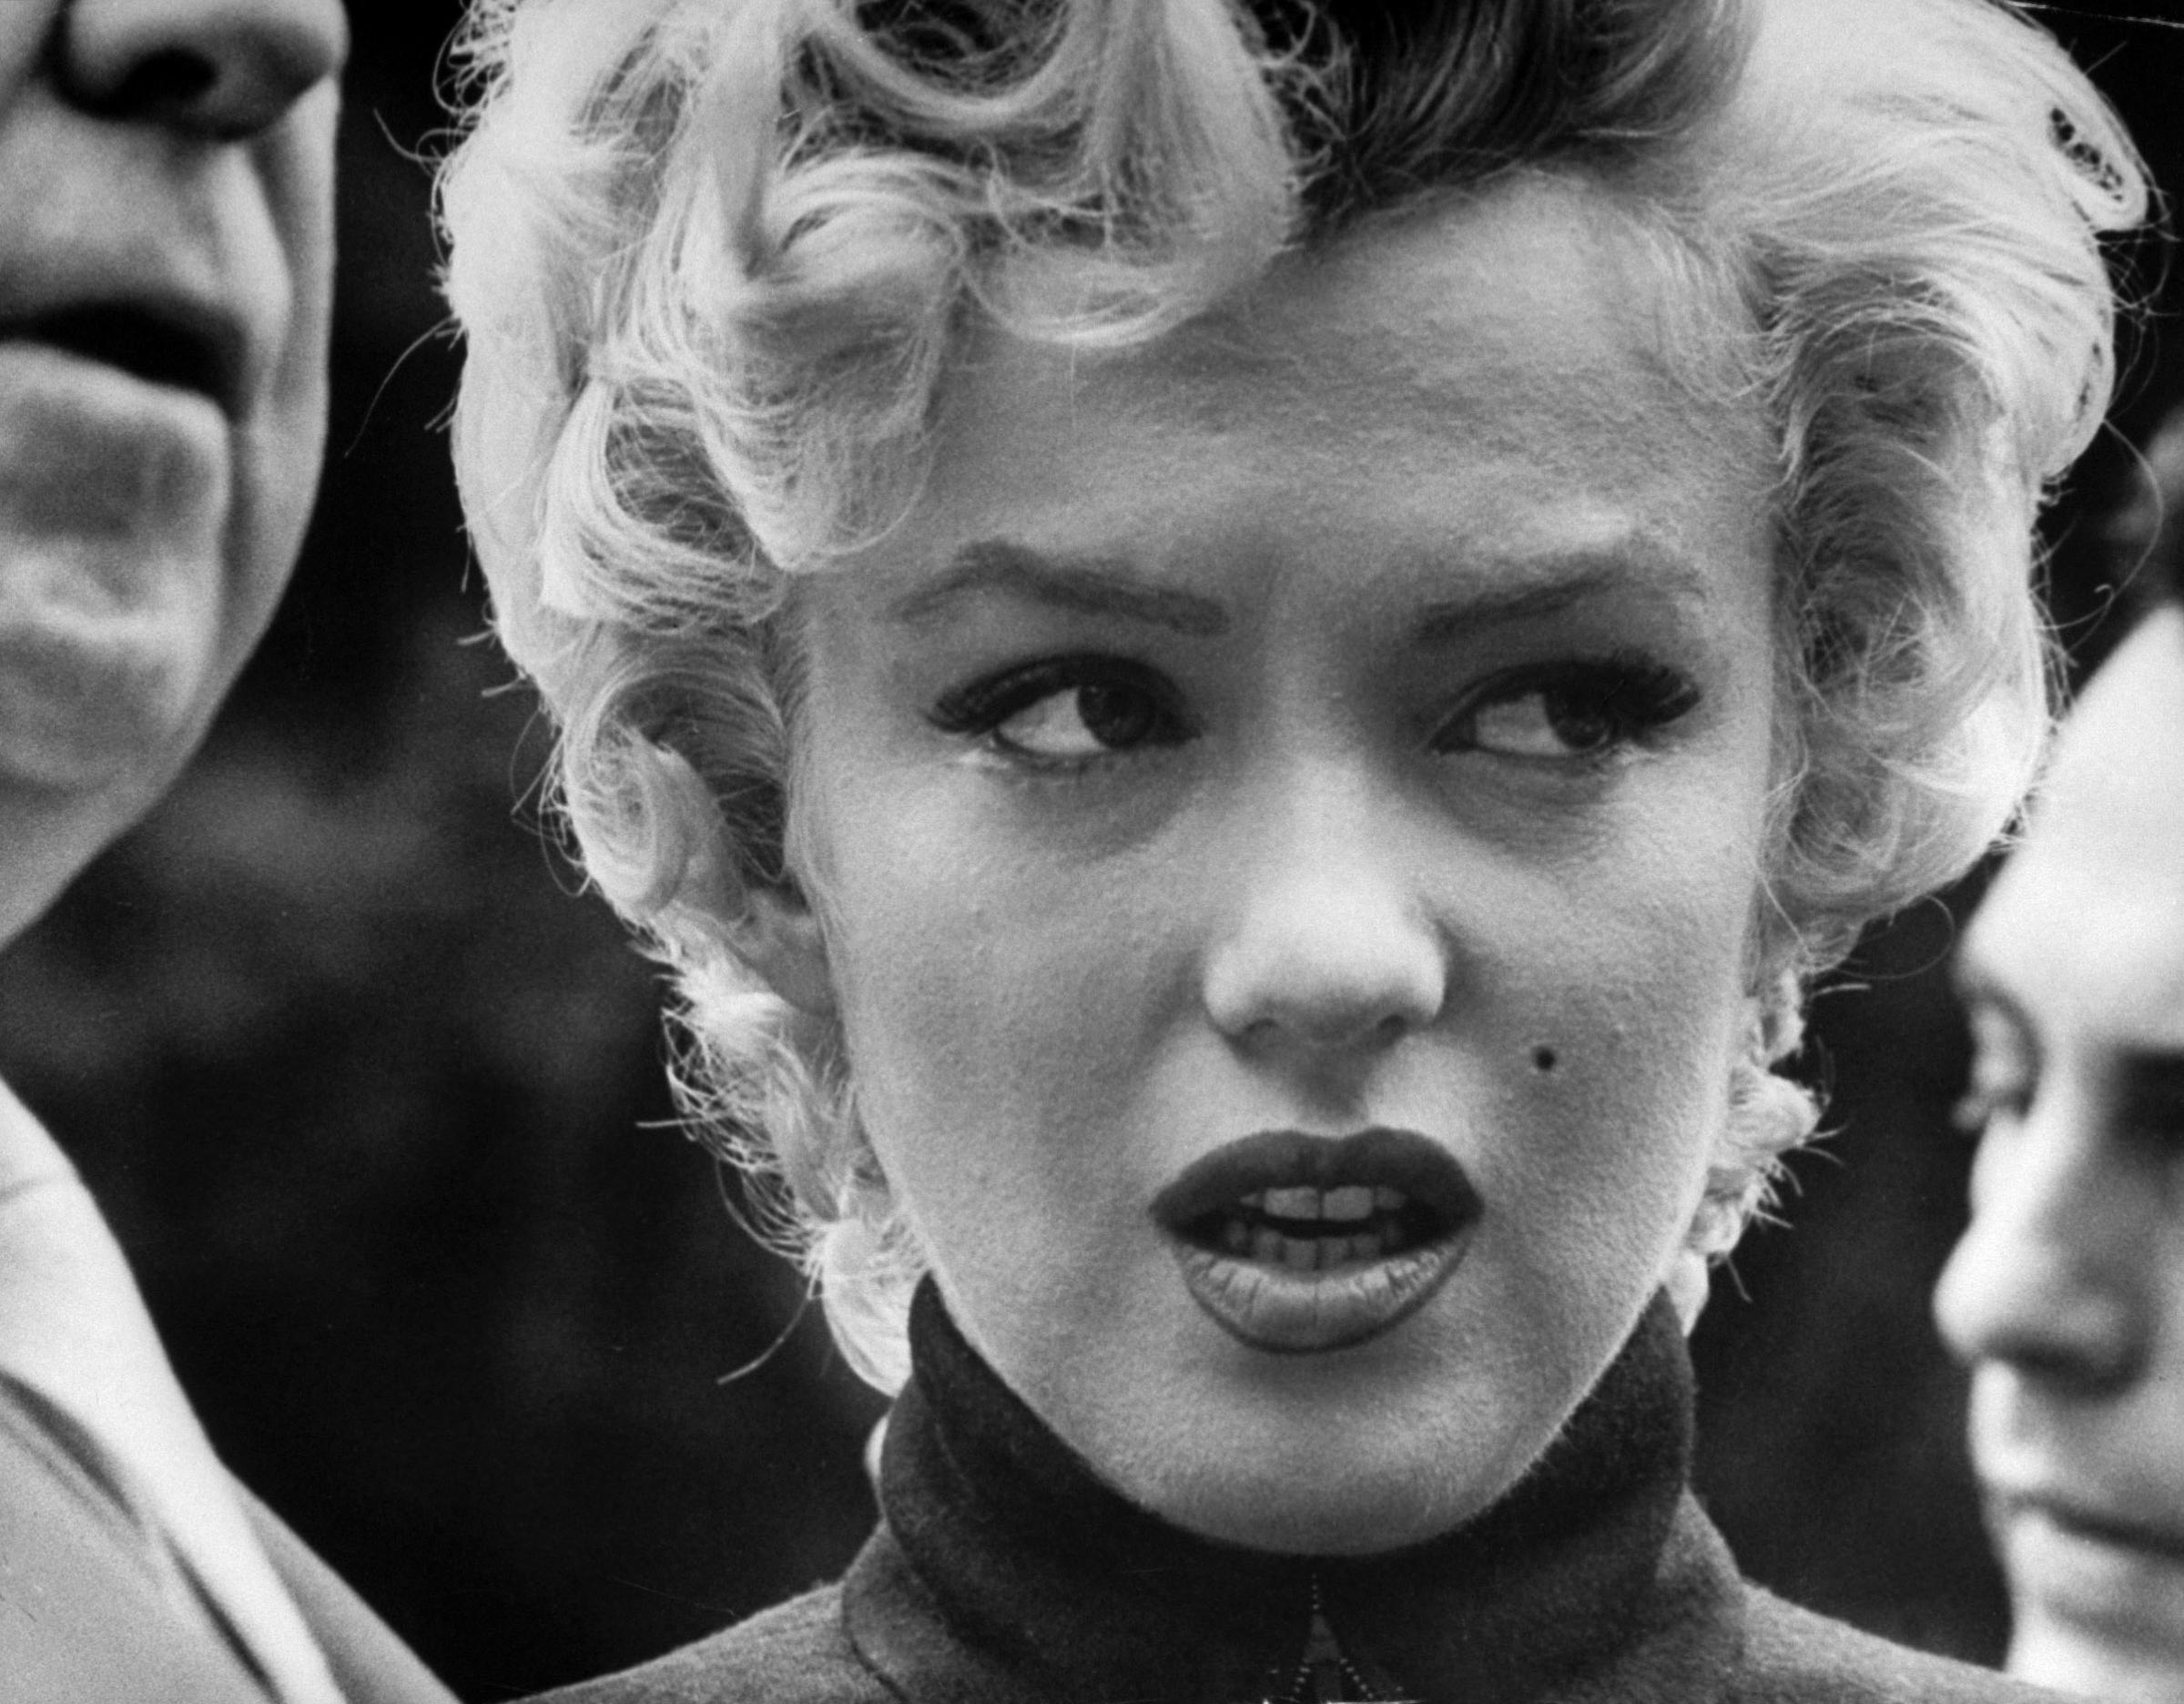 Tearful actress Marilyn Monroe coming out in front of home to face dozens of reporters after announcement of her divorce fr. baseball great Joe DiMaggio, 1954.